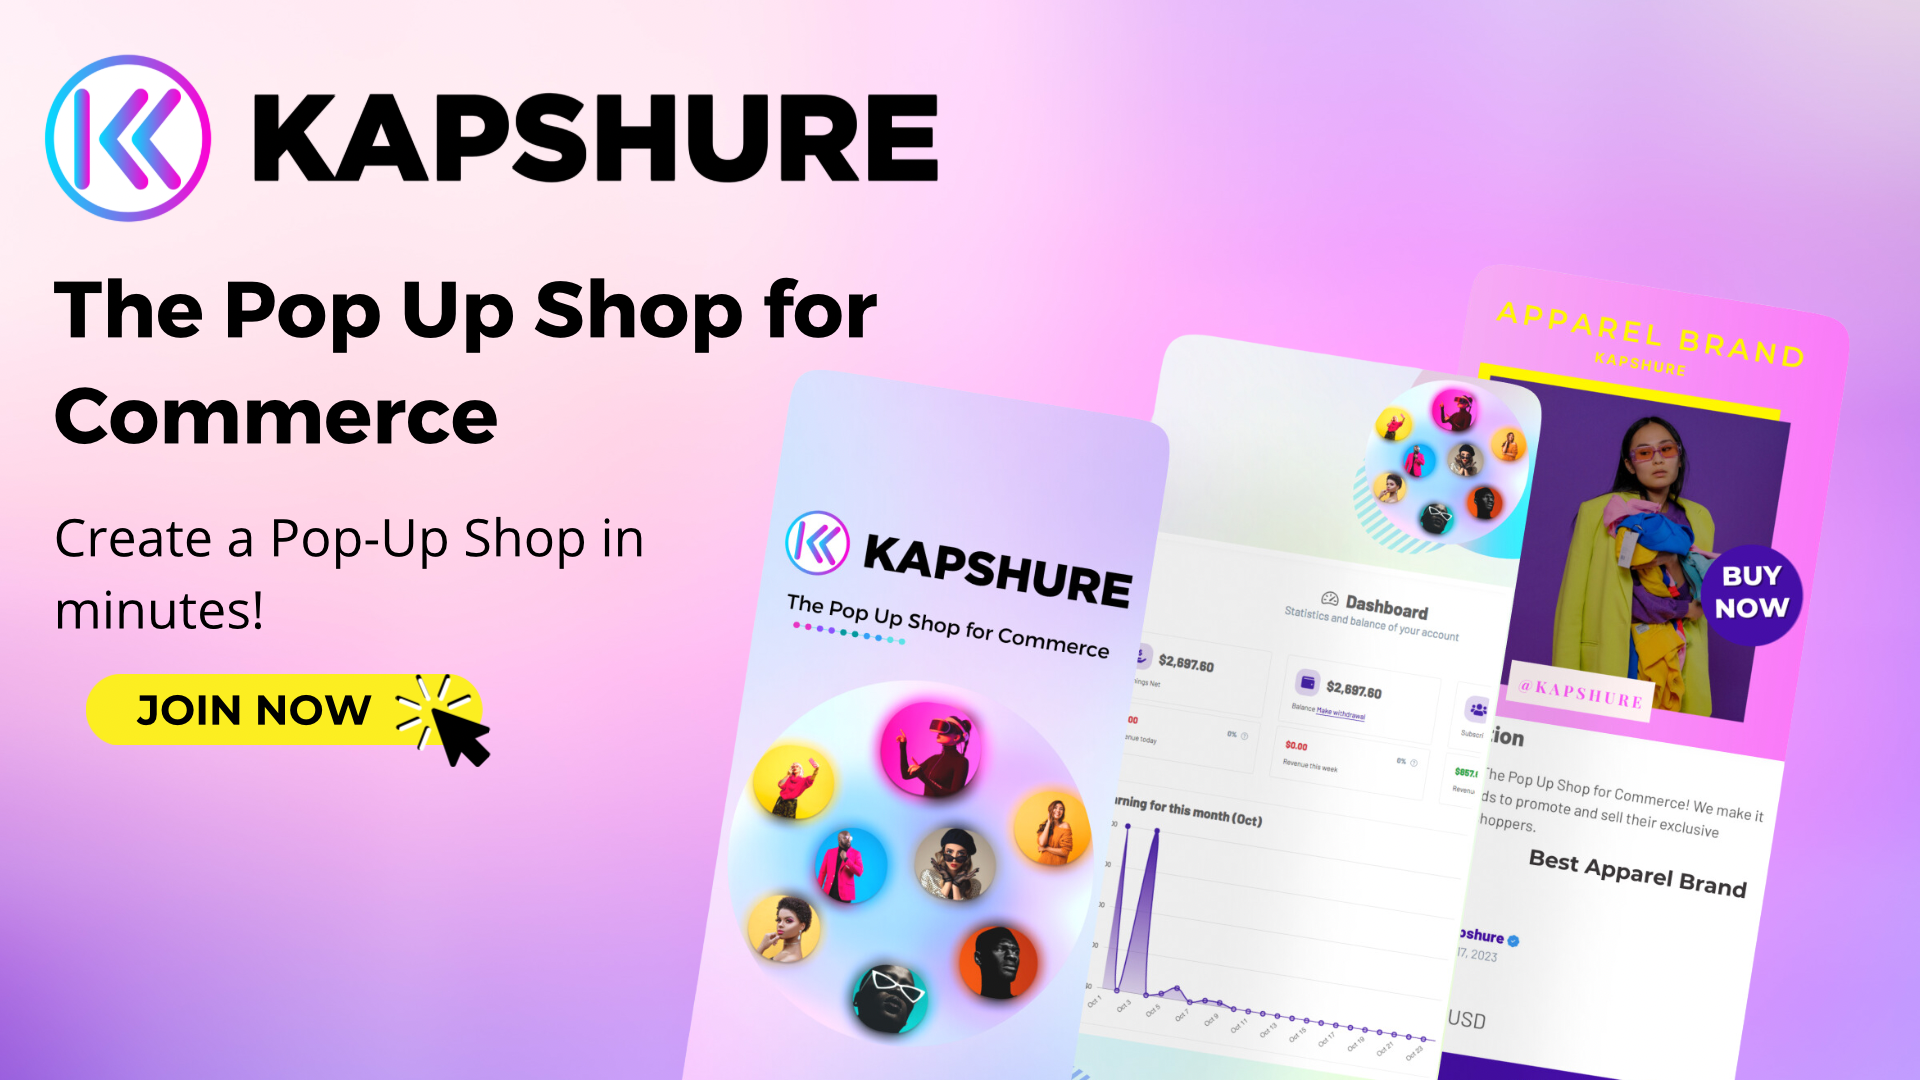 Kapshure The Pop Up Shop for Commerce